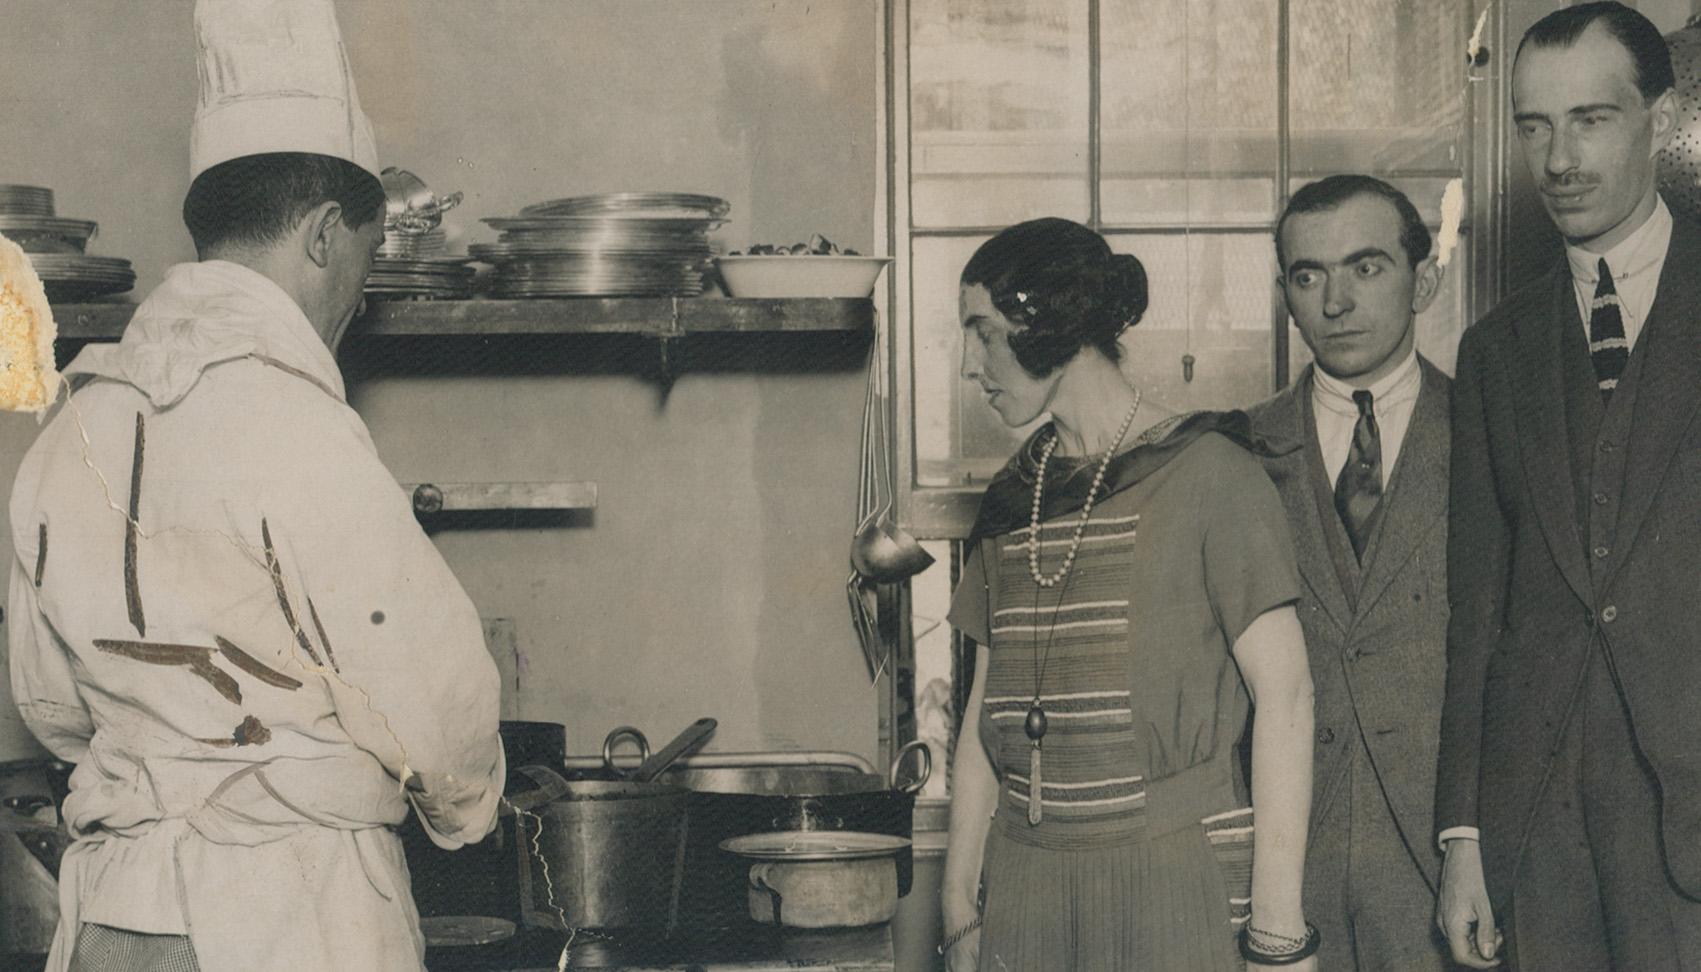 Her son, Prince Andrew, and his wife are seen in the centre picture supervising the kitchen in a refugees' club